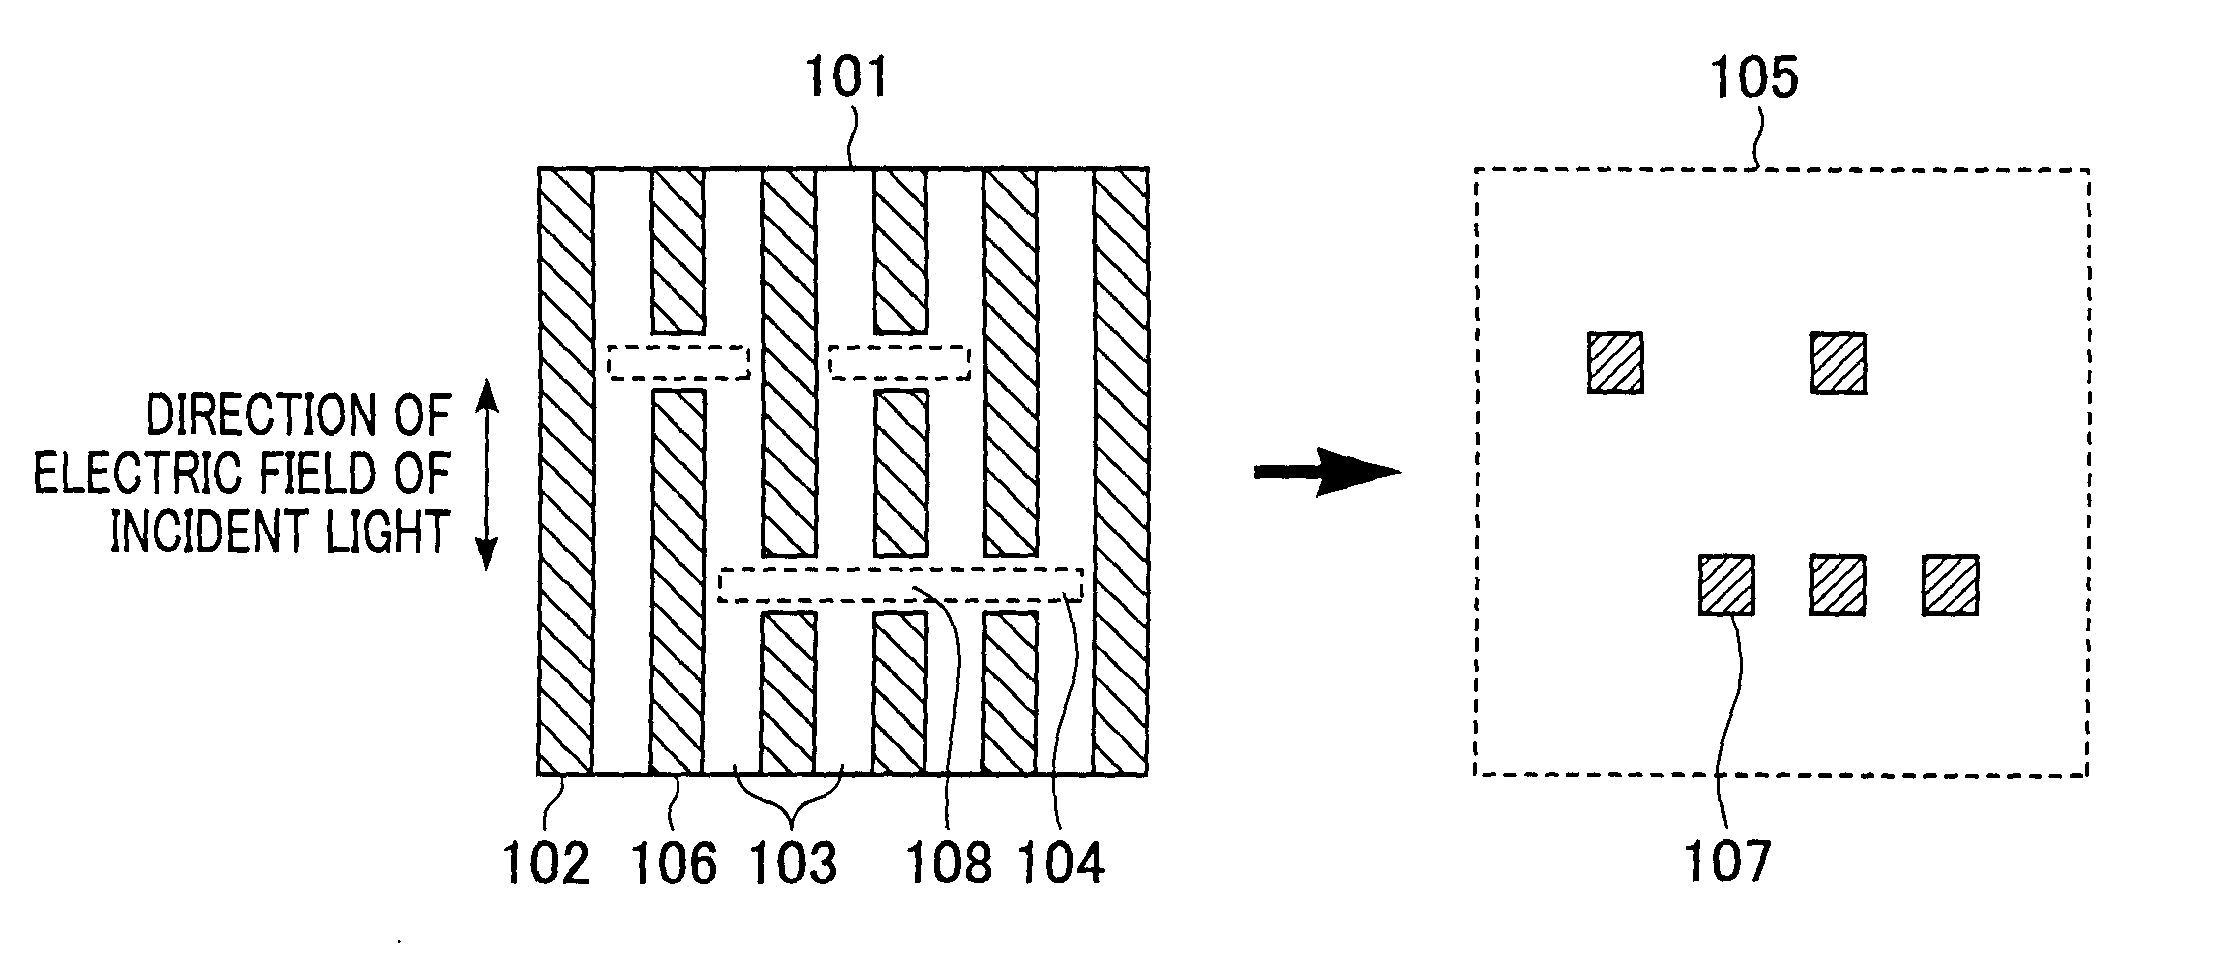 Near-field photomask, near-field exposure apparatus using the photomask, dot pattern forming method using the exposure apparatus, and device manufactured using the method